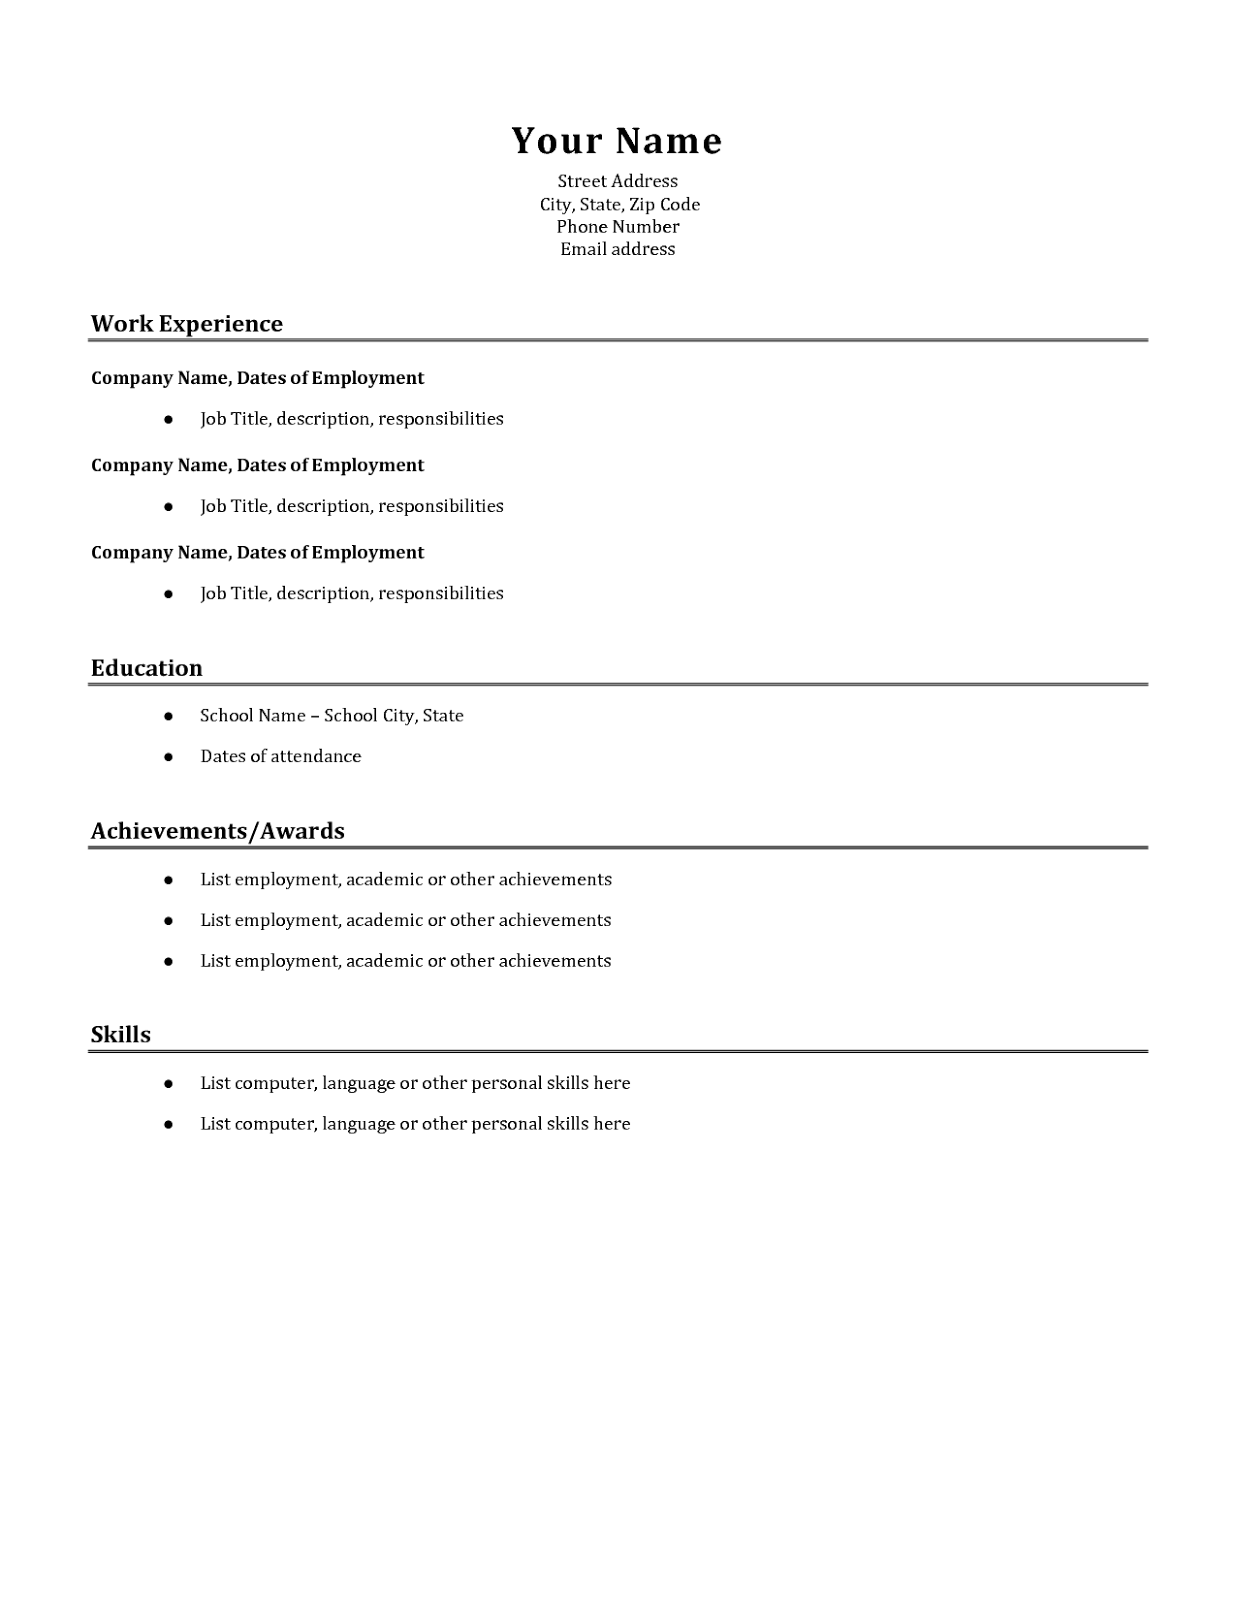 Easy and free resume template